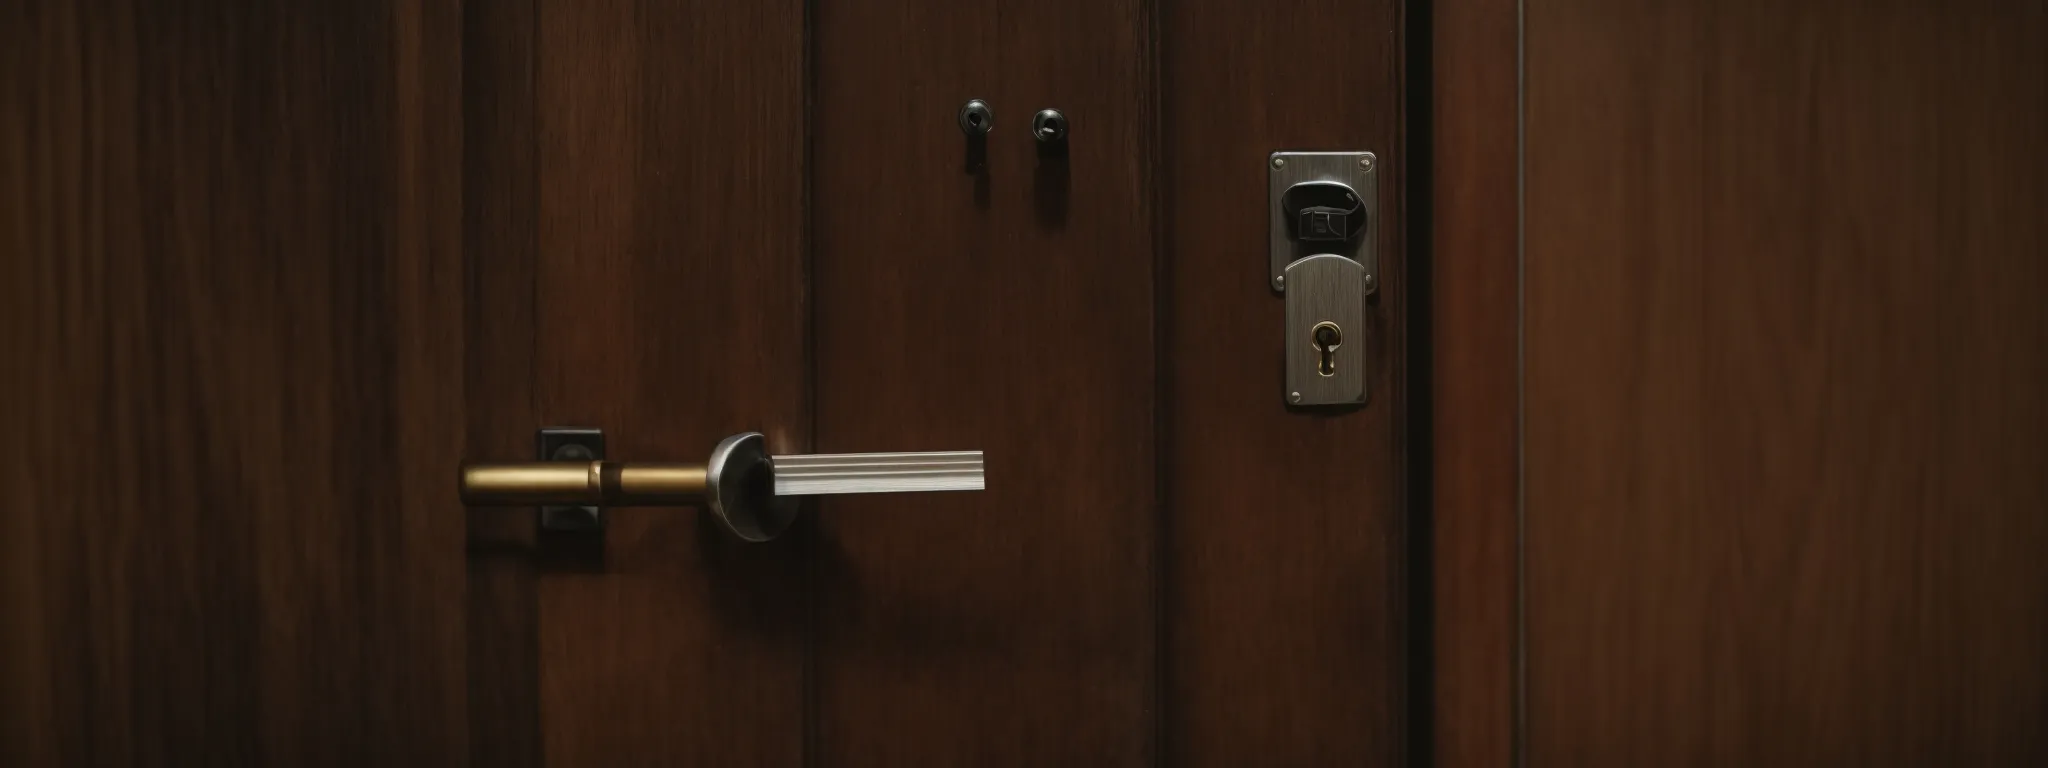 a key fitting into a lock on a wooden door, symbolizing access to seo strategies.